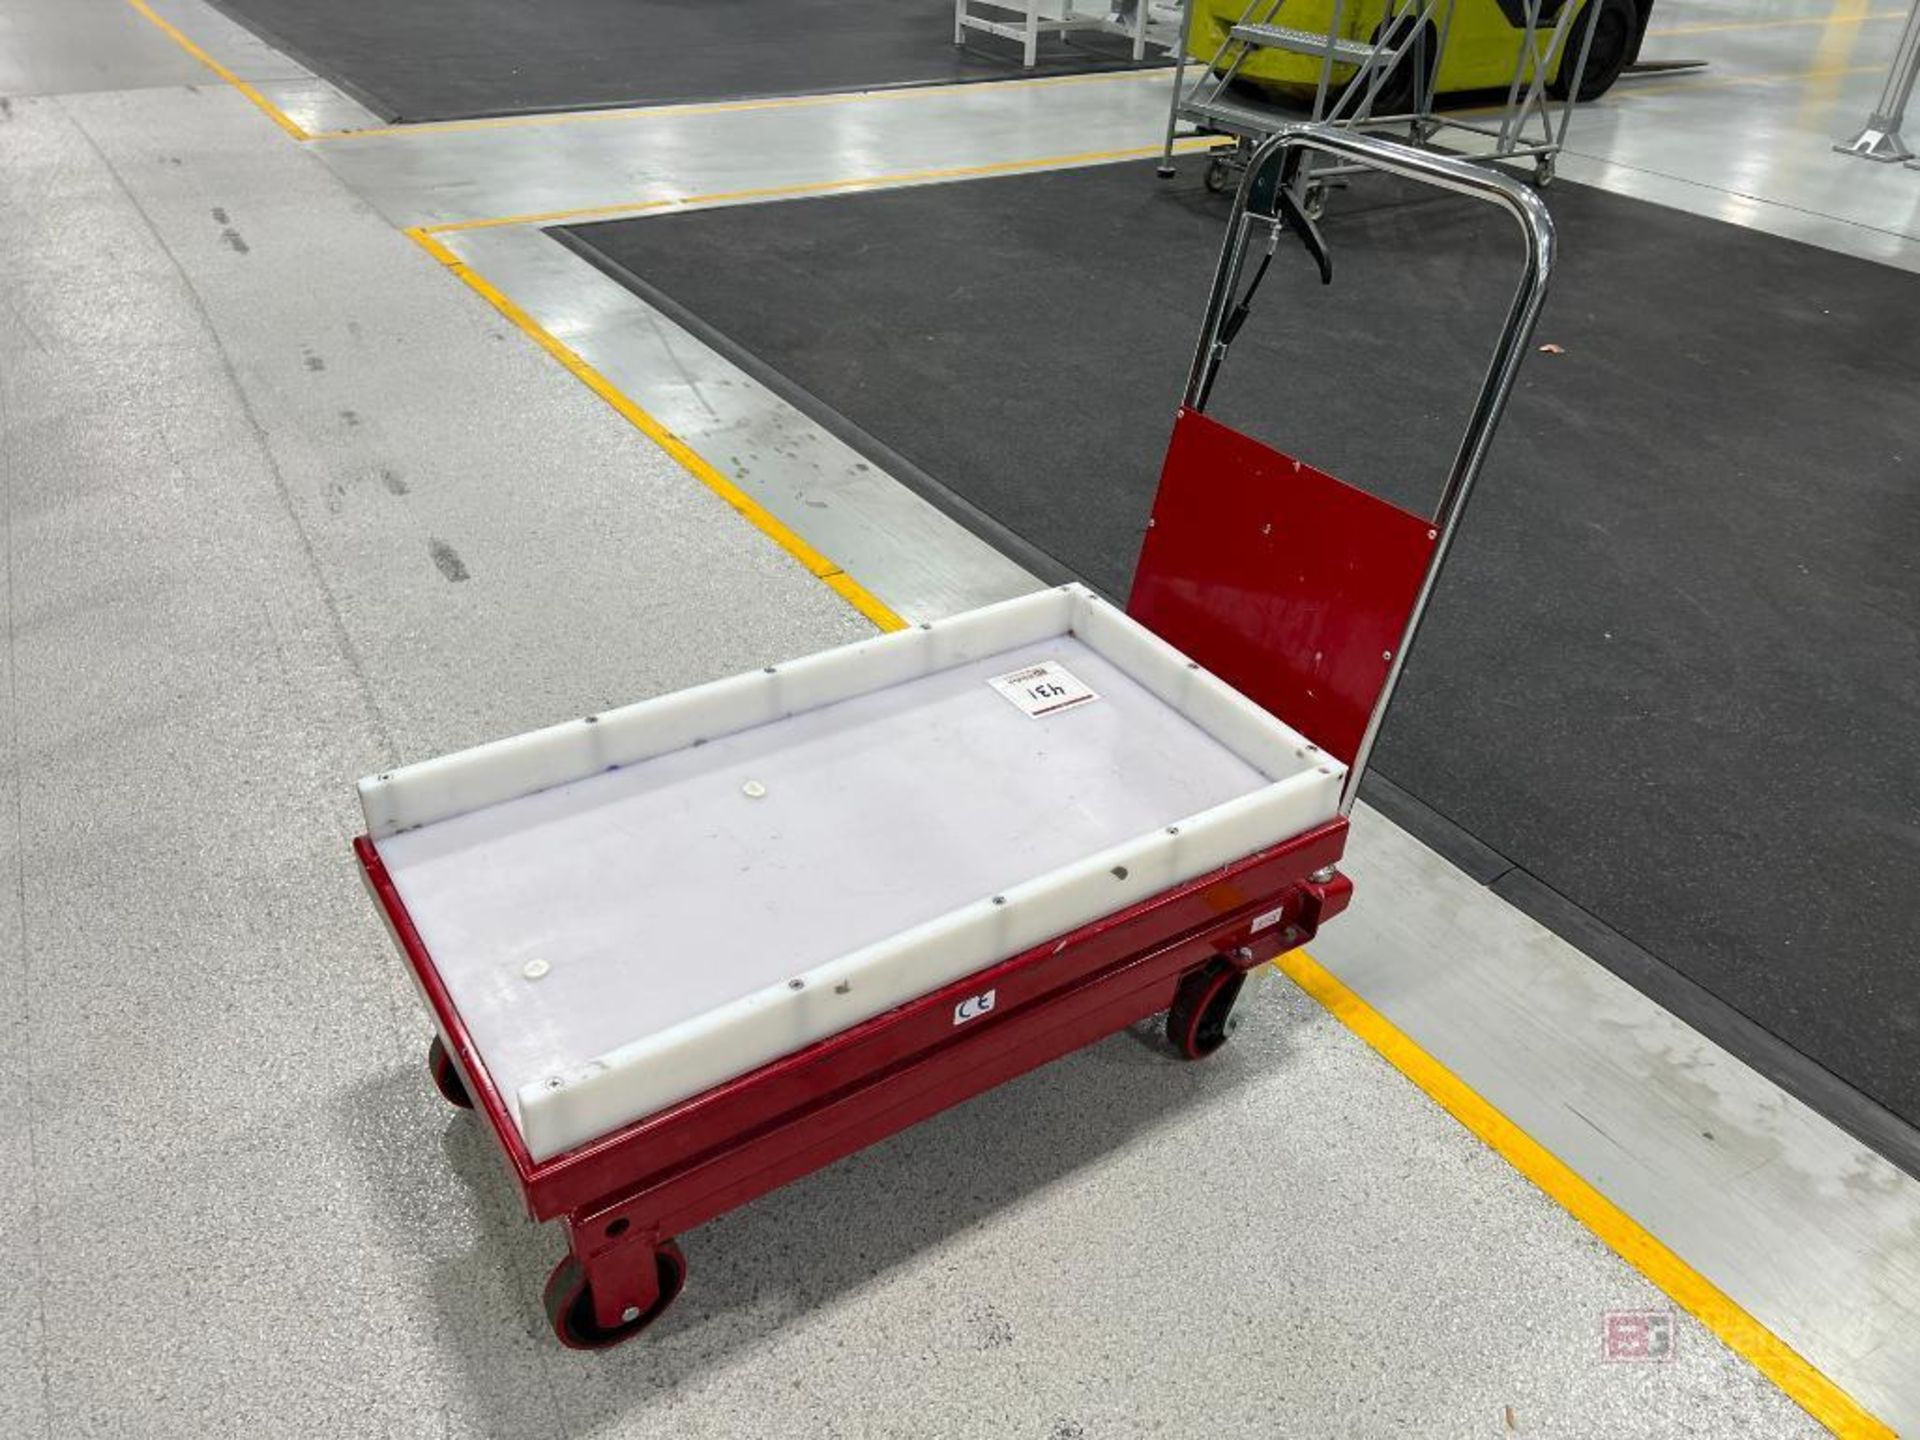 Uline Portable Manual Hydraulic Lift Table - Image 2 of 2